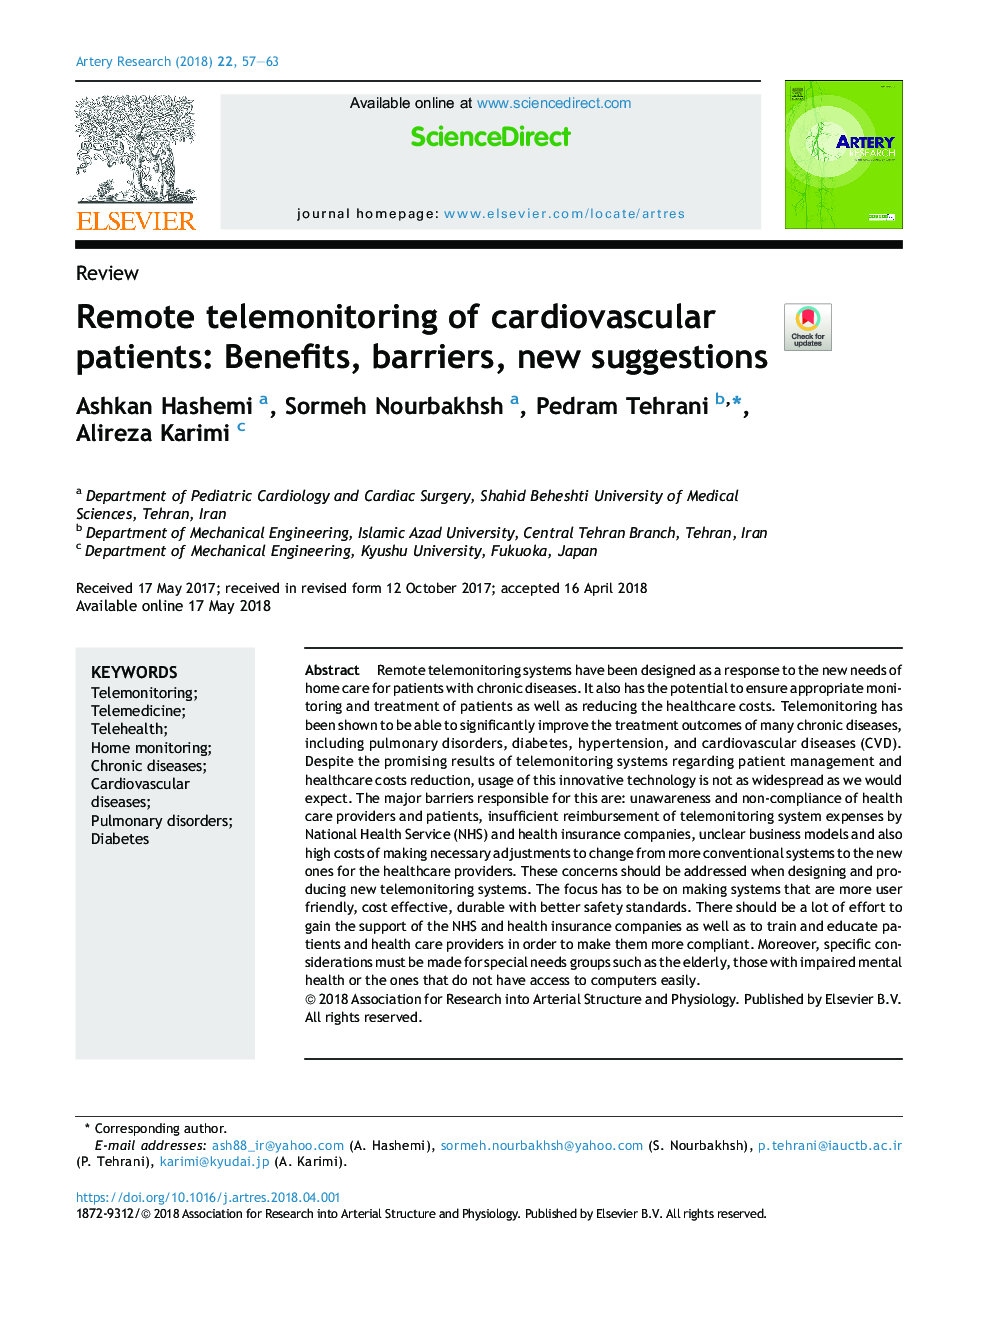 Remote telemonitoring of cardiovascular patients: Benefits, barriers, new suggestions